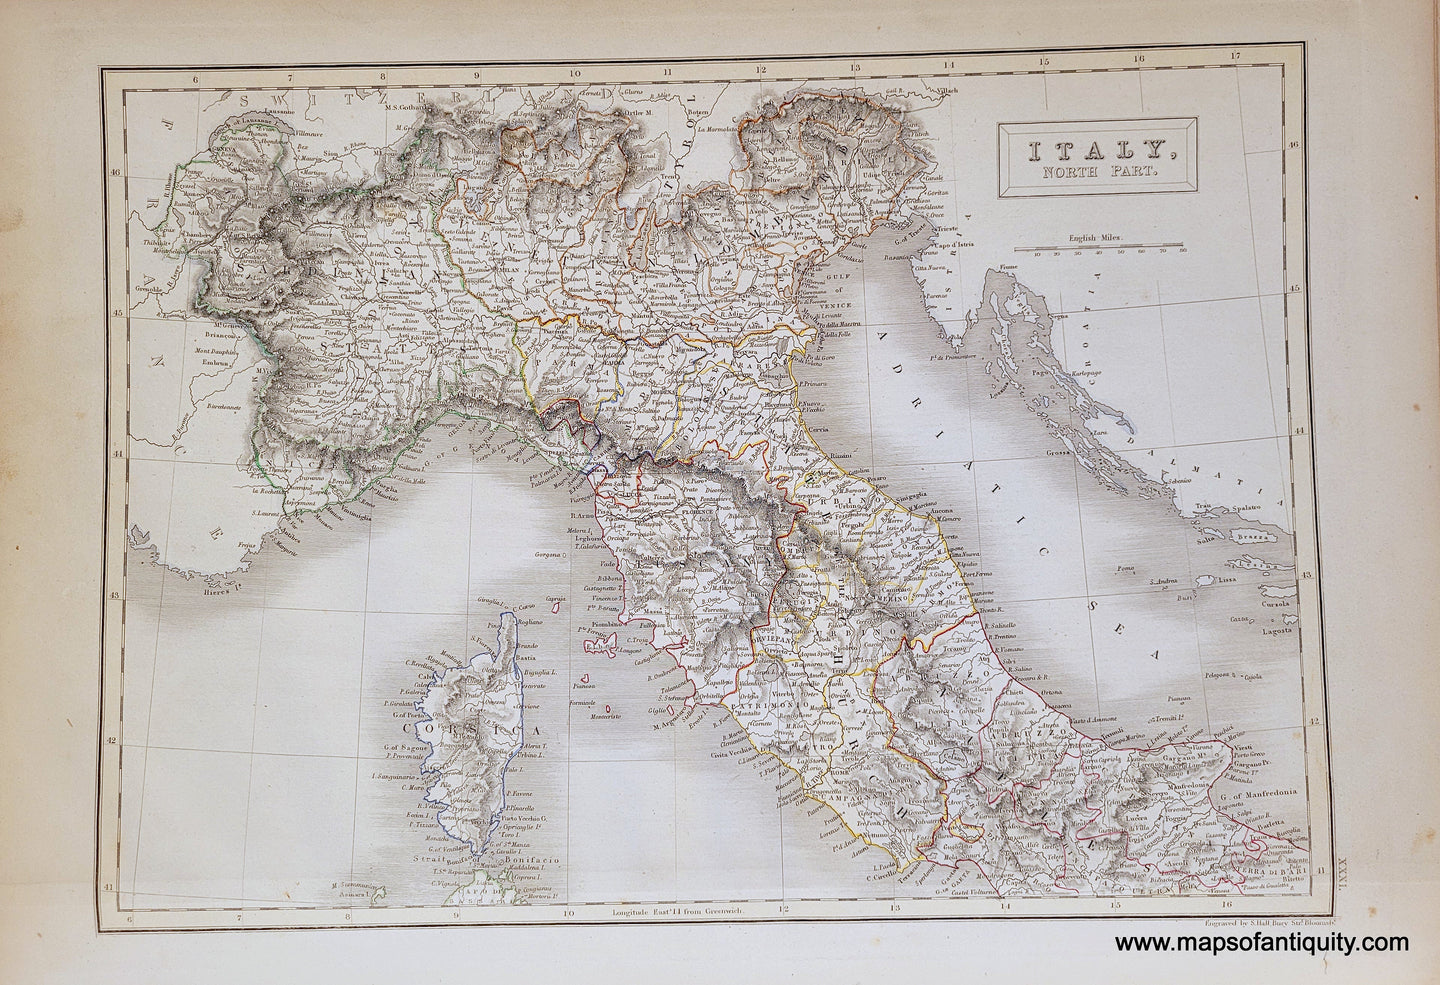 Genuine-Antique-Map-Italy-North-Part-1841-Black-Maps-Of-Antiquity